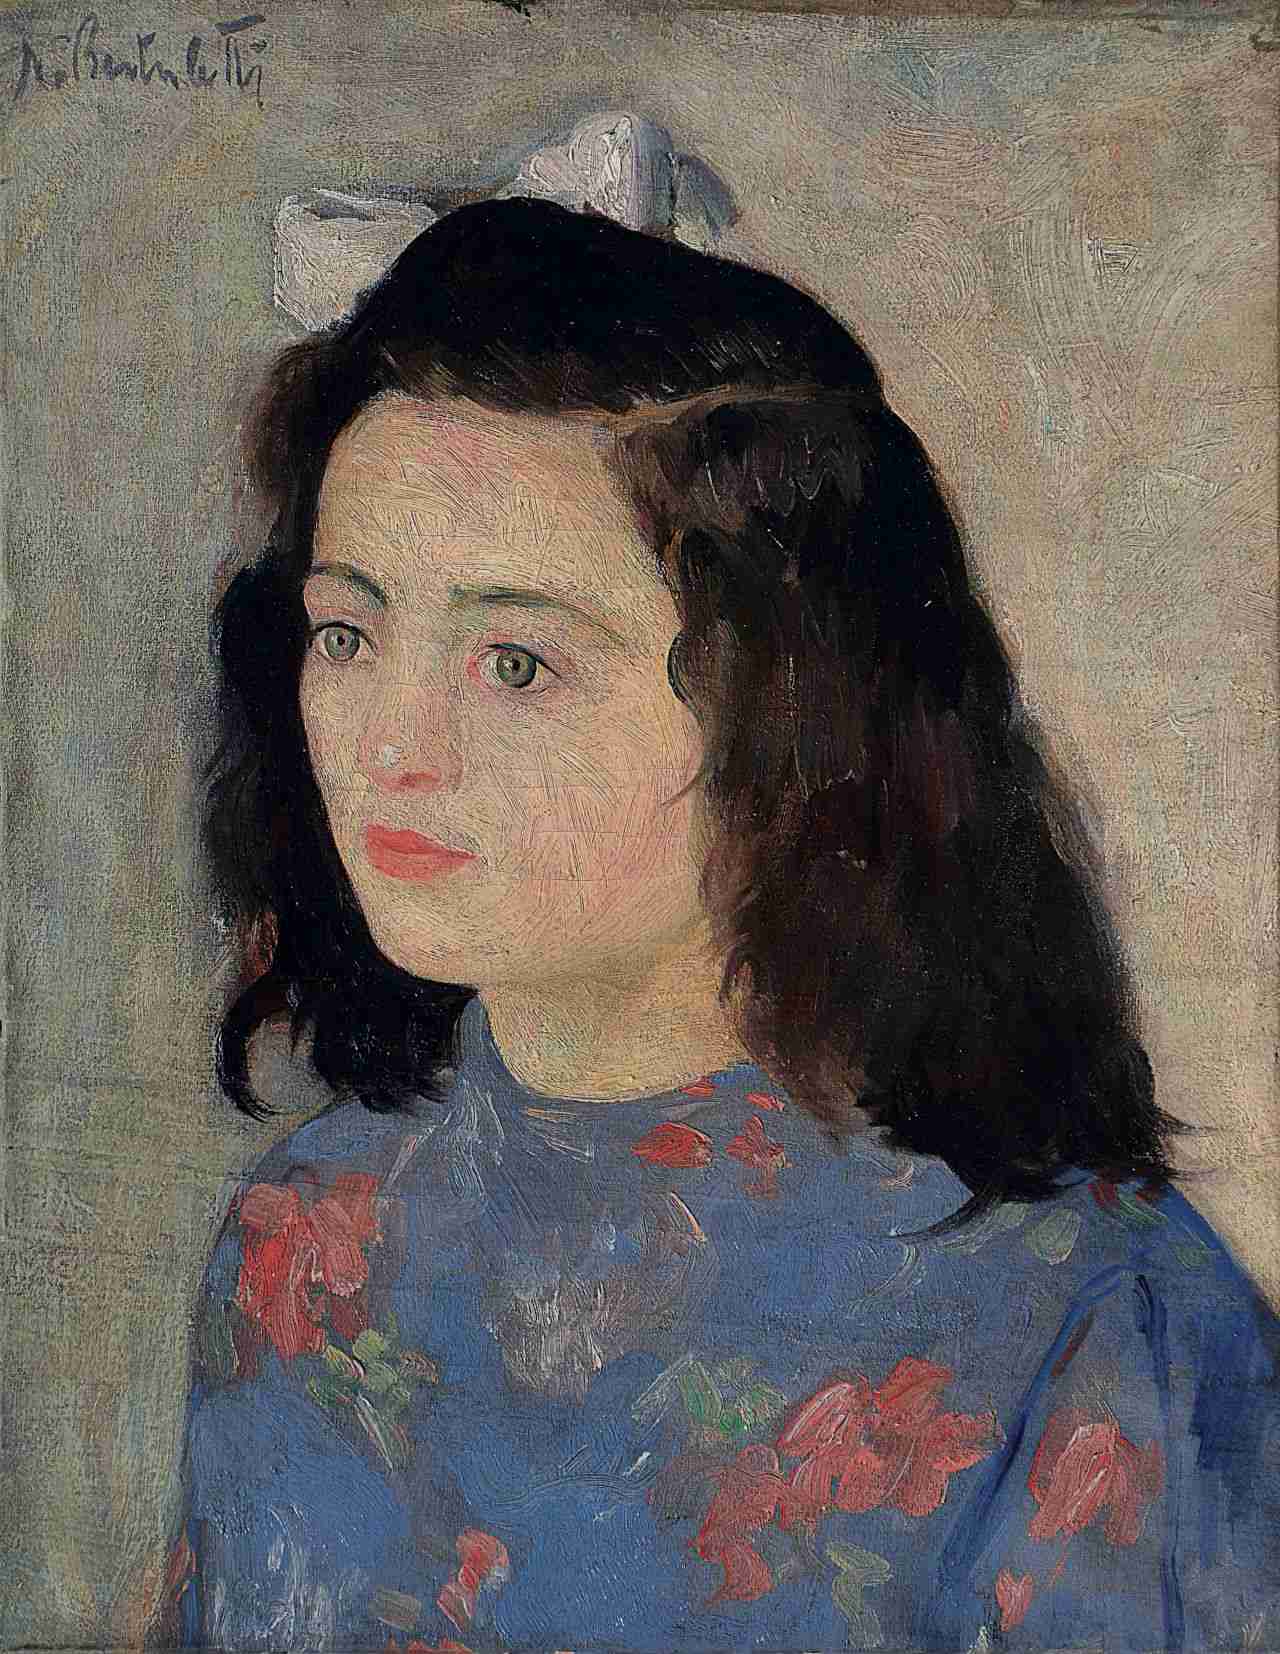 Girl with a bow in her hair 1937